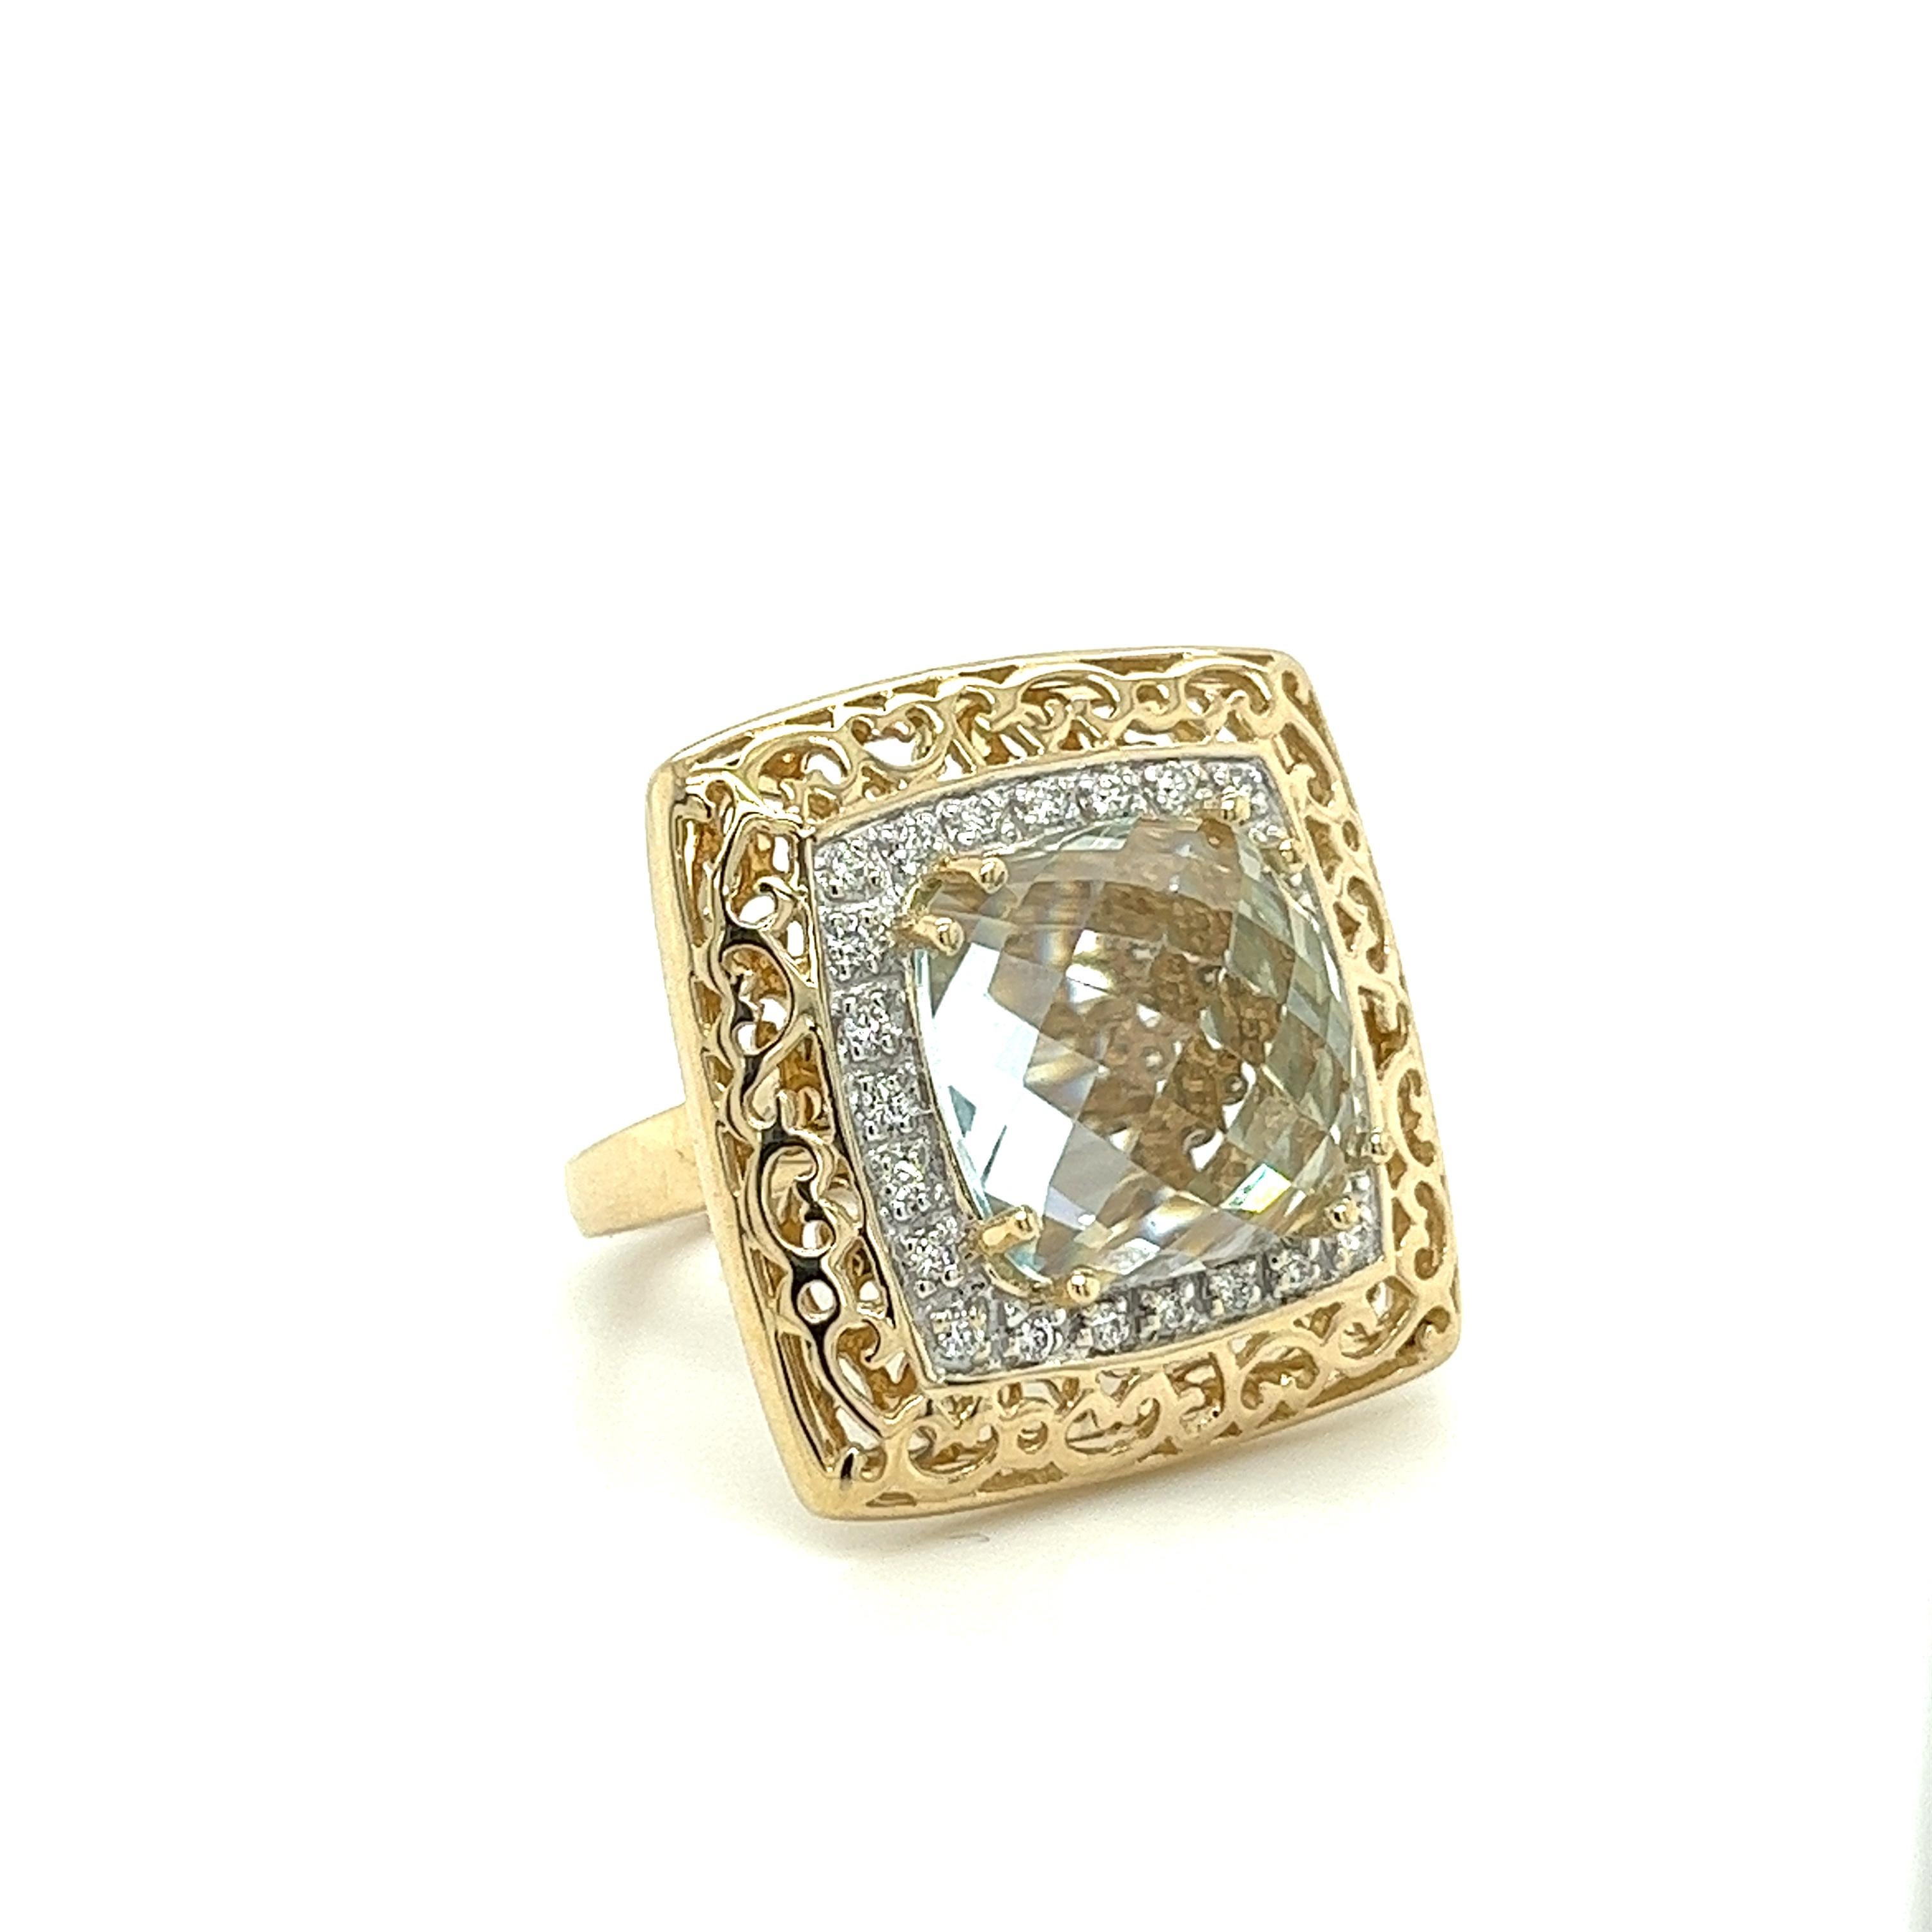 Welcoming this elegant multi stone cocktail ring; sparkling with a Sky Blue Topaz and diamond side-stones. Set in a 14K yellow gold, this ring is sure to turn heads with its gorgeous detailing. The main stone is checkerboard cut, adding depth and